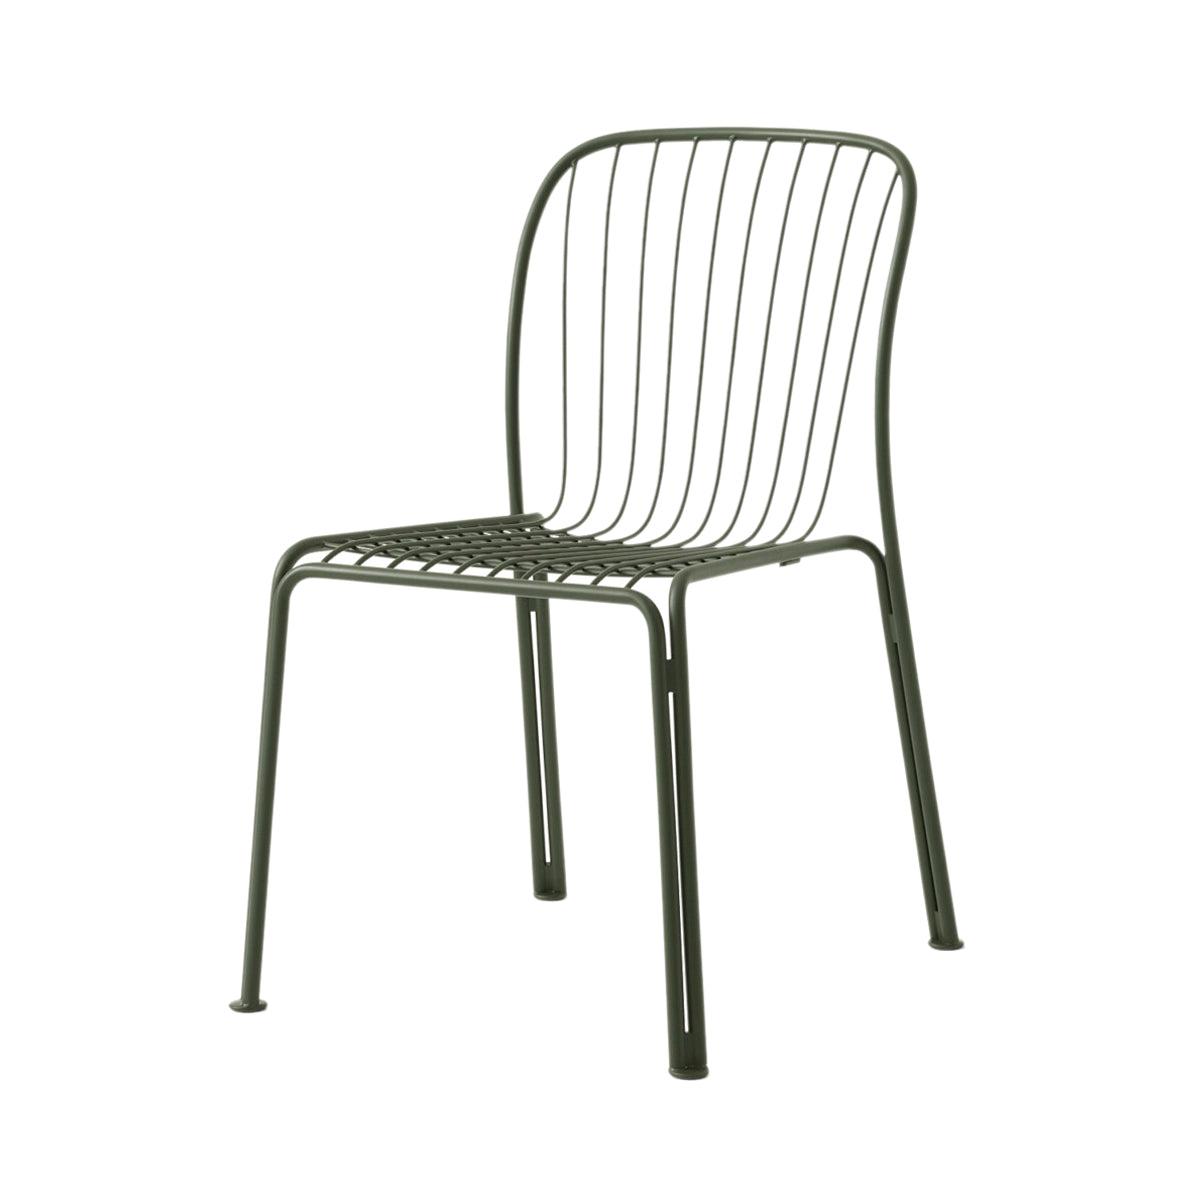 Thorvald SC94 Side Chair: Outdoor + Bronze Green + Without Cushion